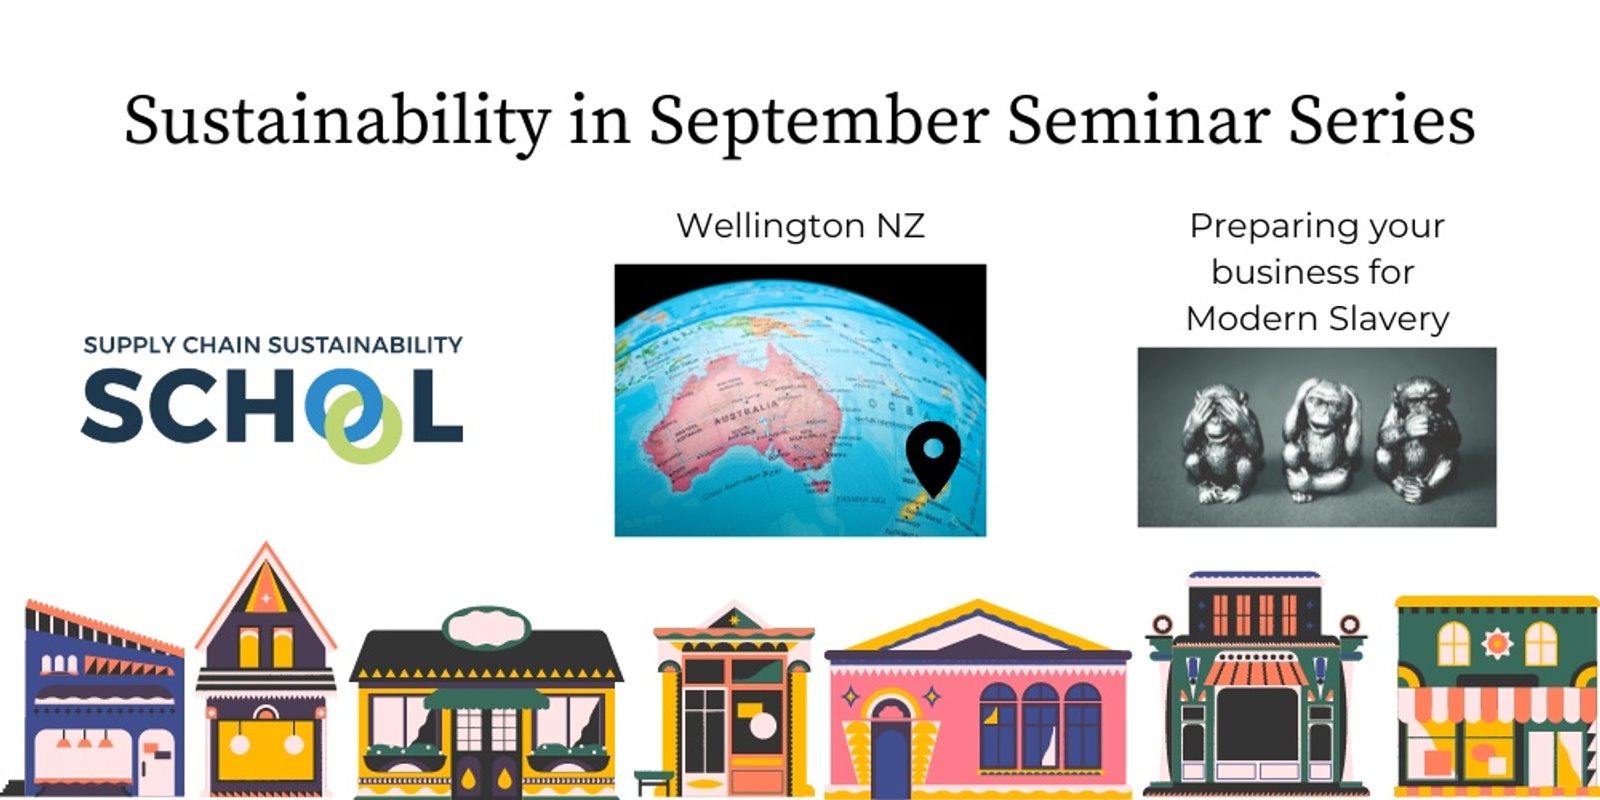 Banner image for Preparing your business for Modern Slavery | WLG | Sustainability in September Seminar Series